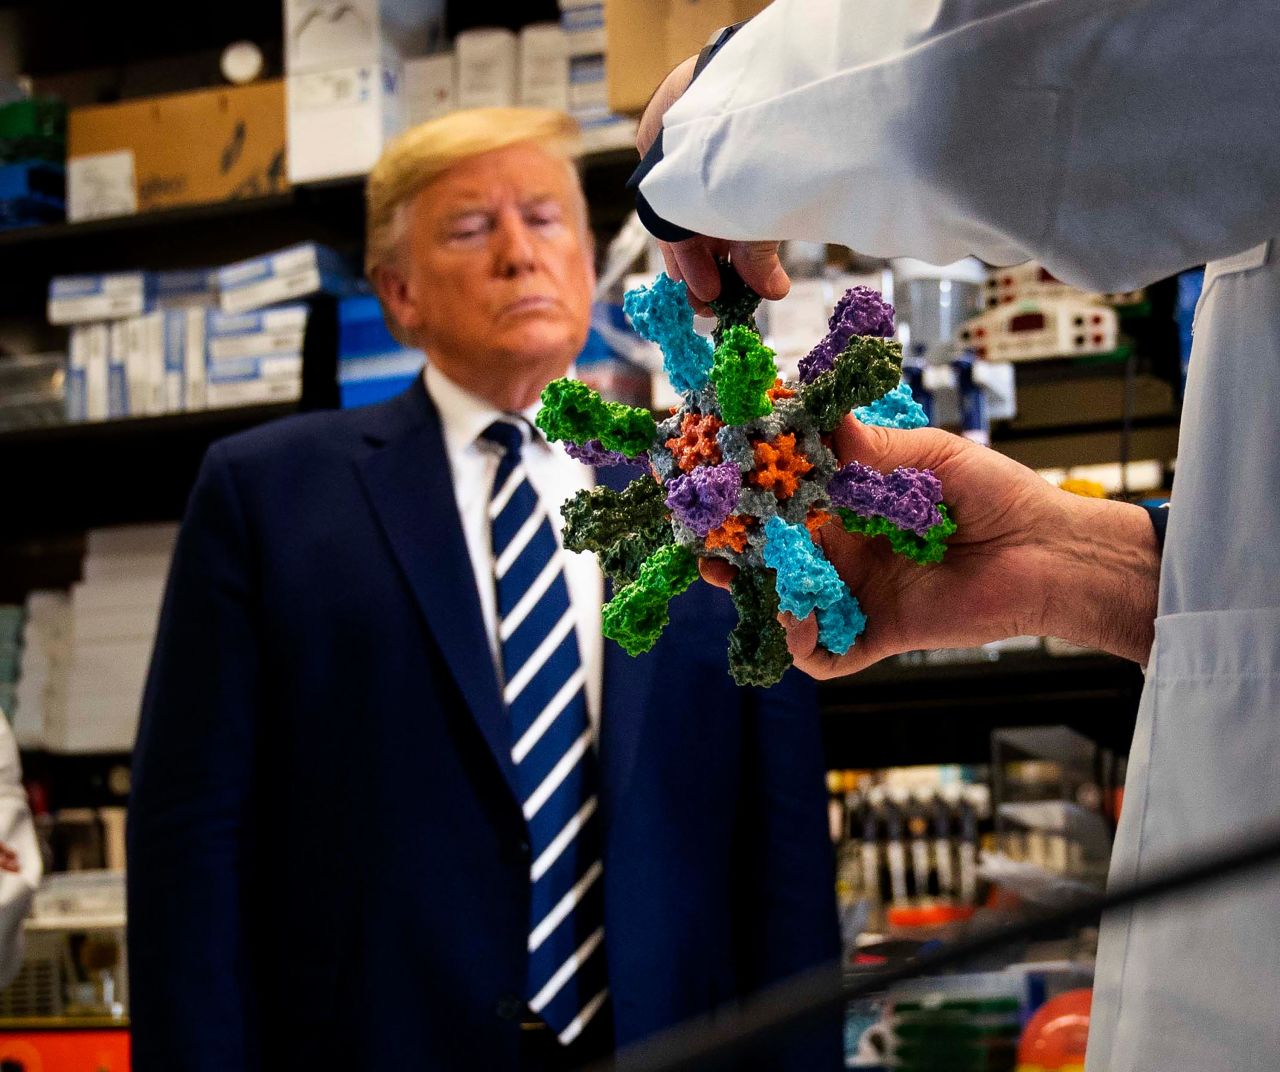 Trump looks at a coronavirus model while touring the National Institutes of Health in March 2020.